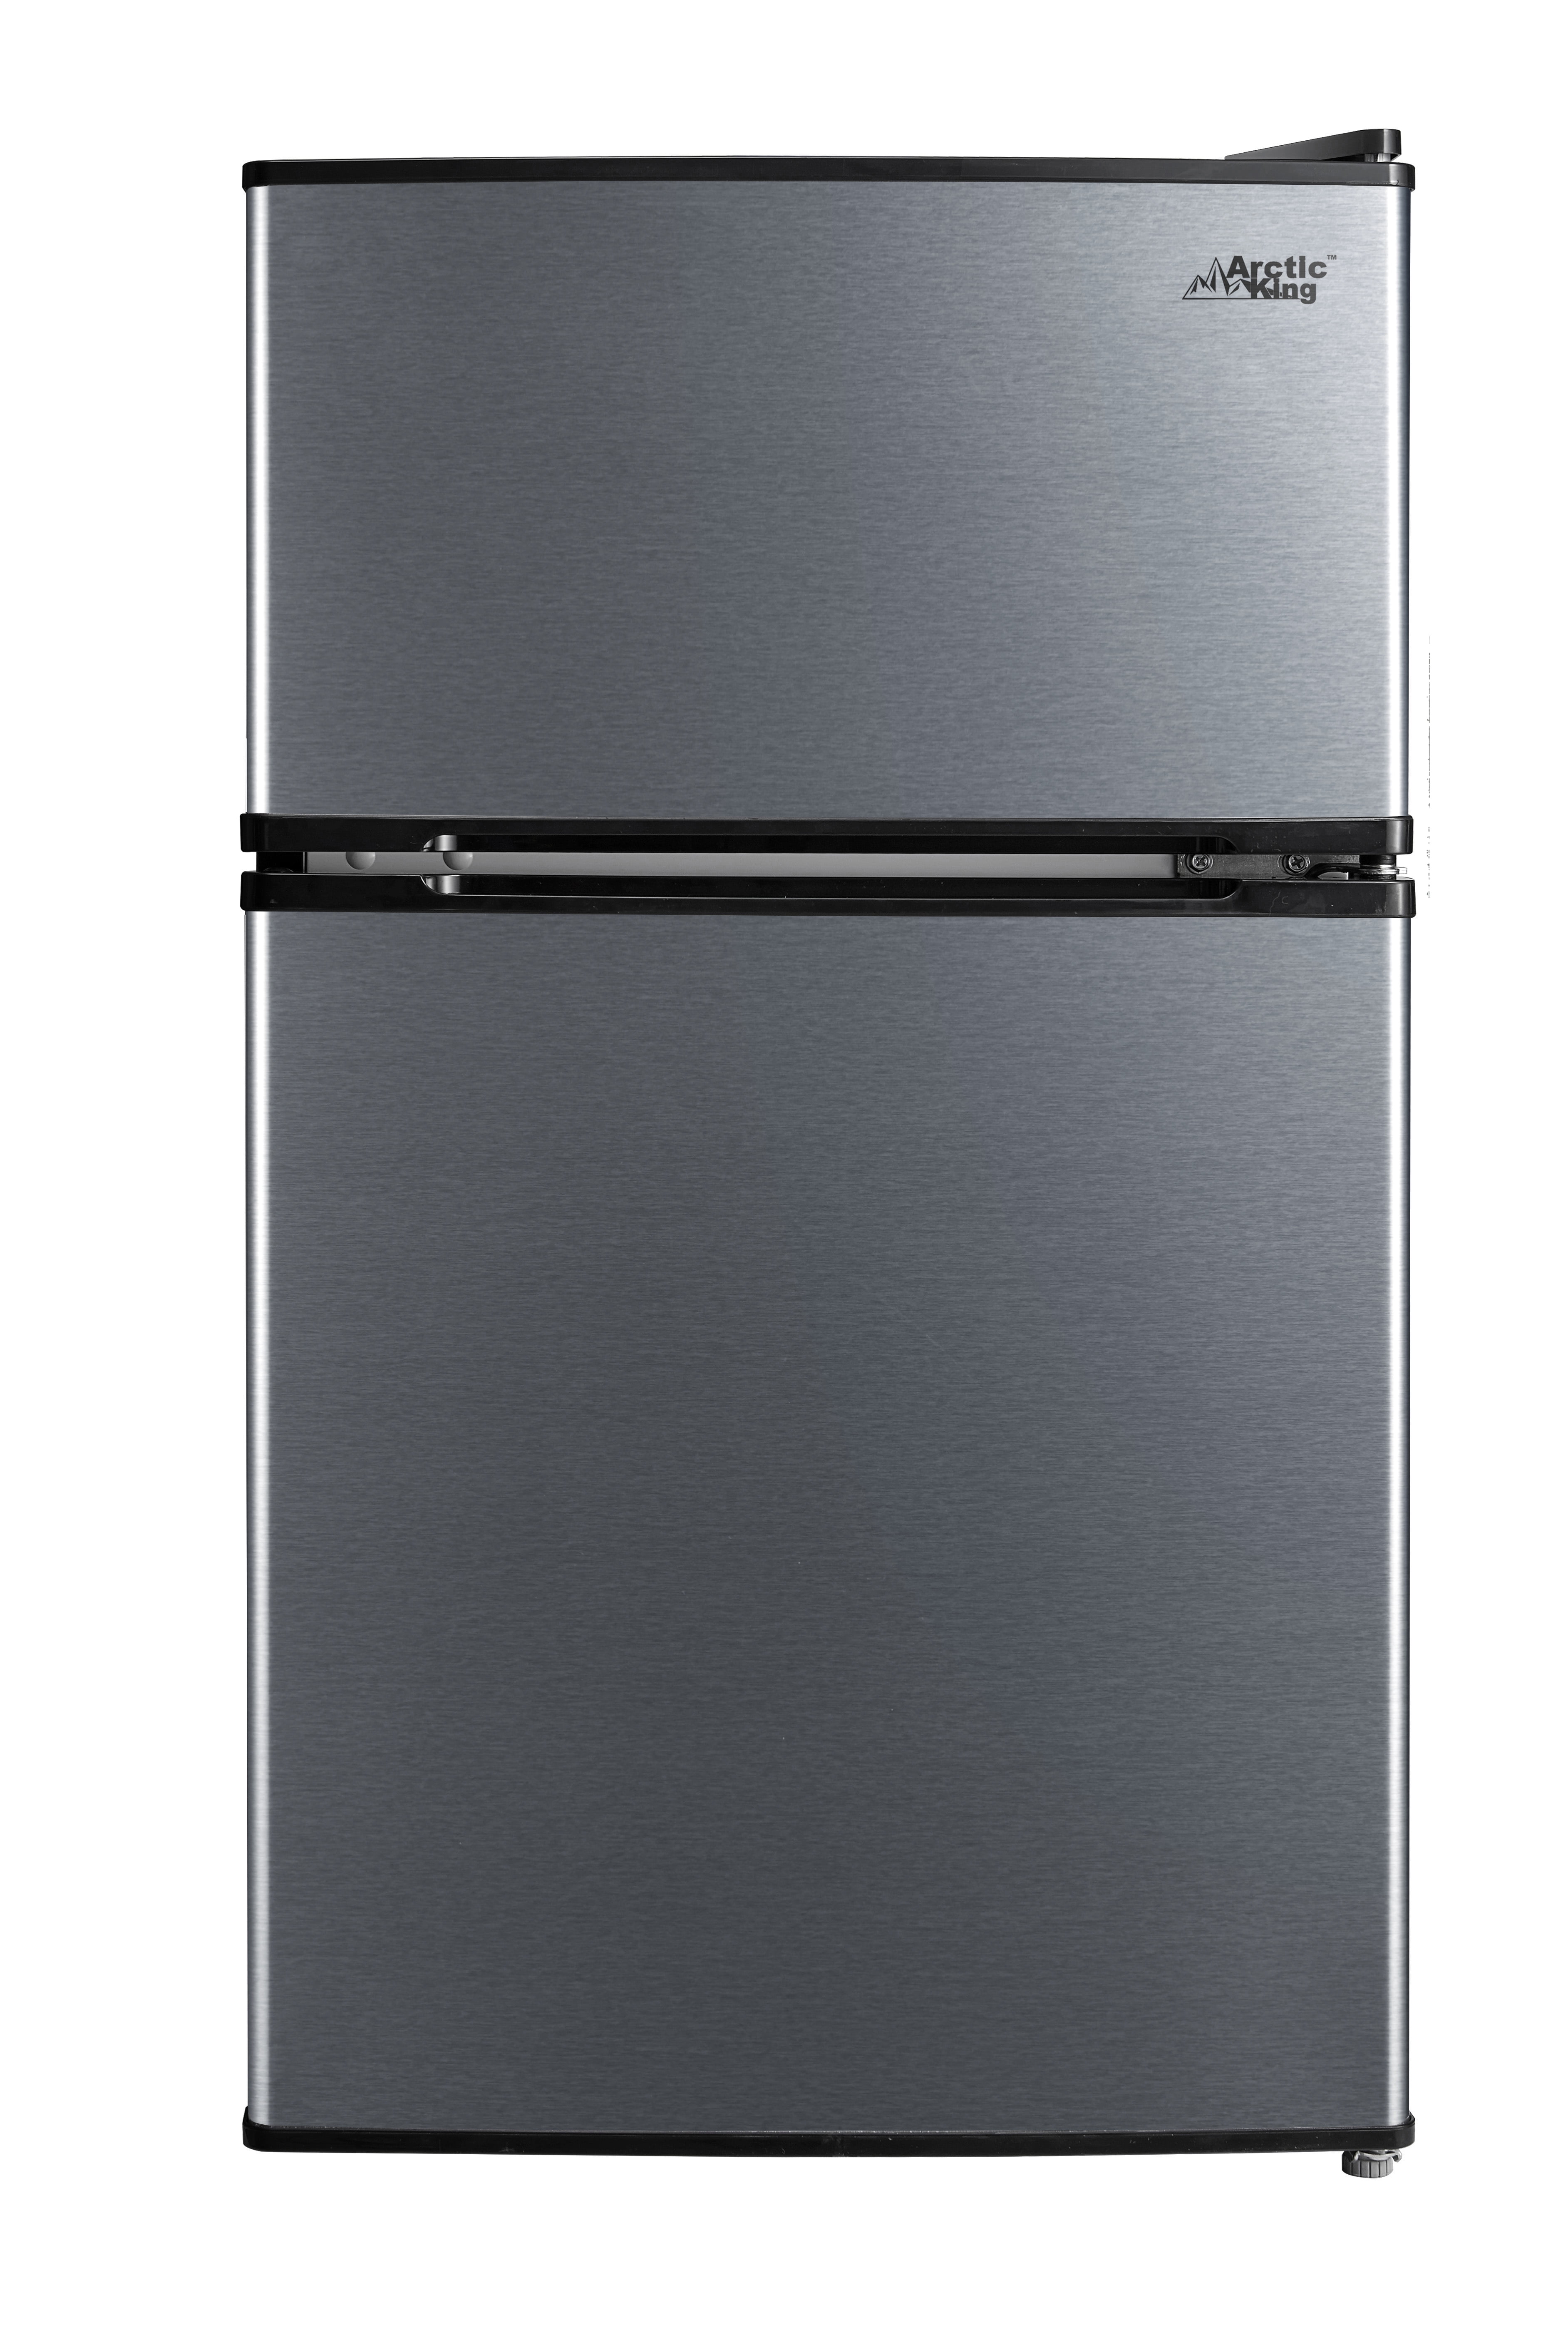 Stainless Arctic King Mini 3.2 Cu ft Two Door Compact Refrigerator with Freezer 